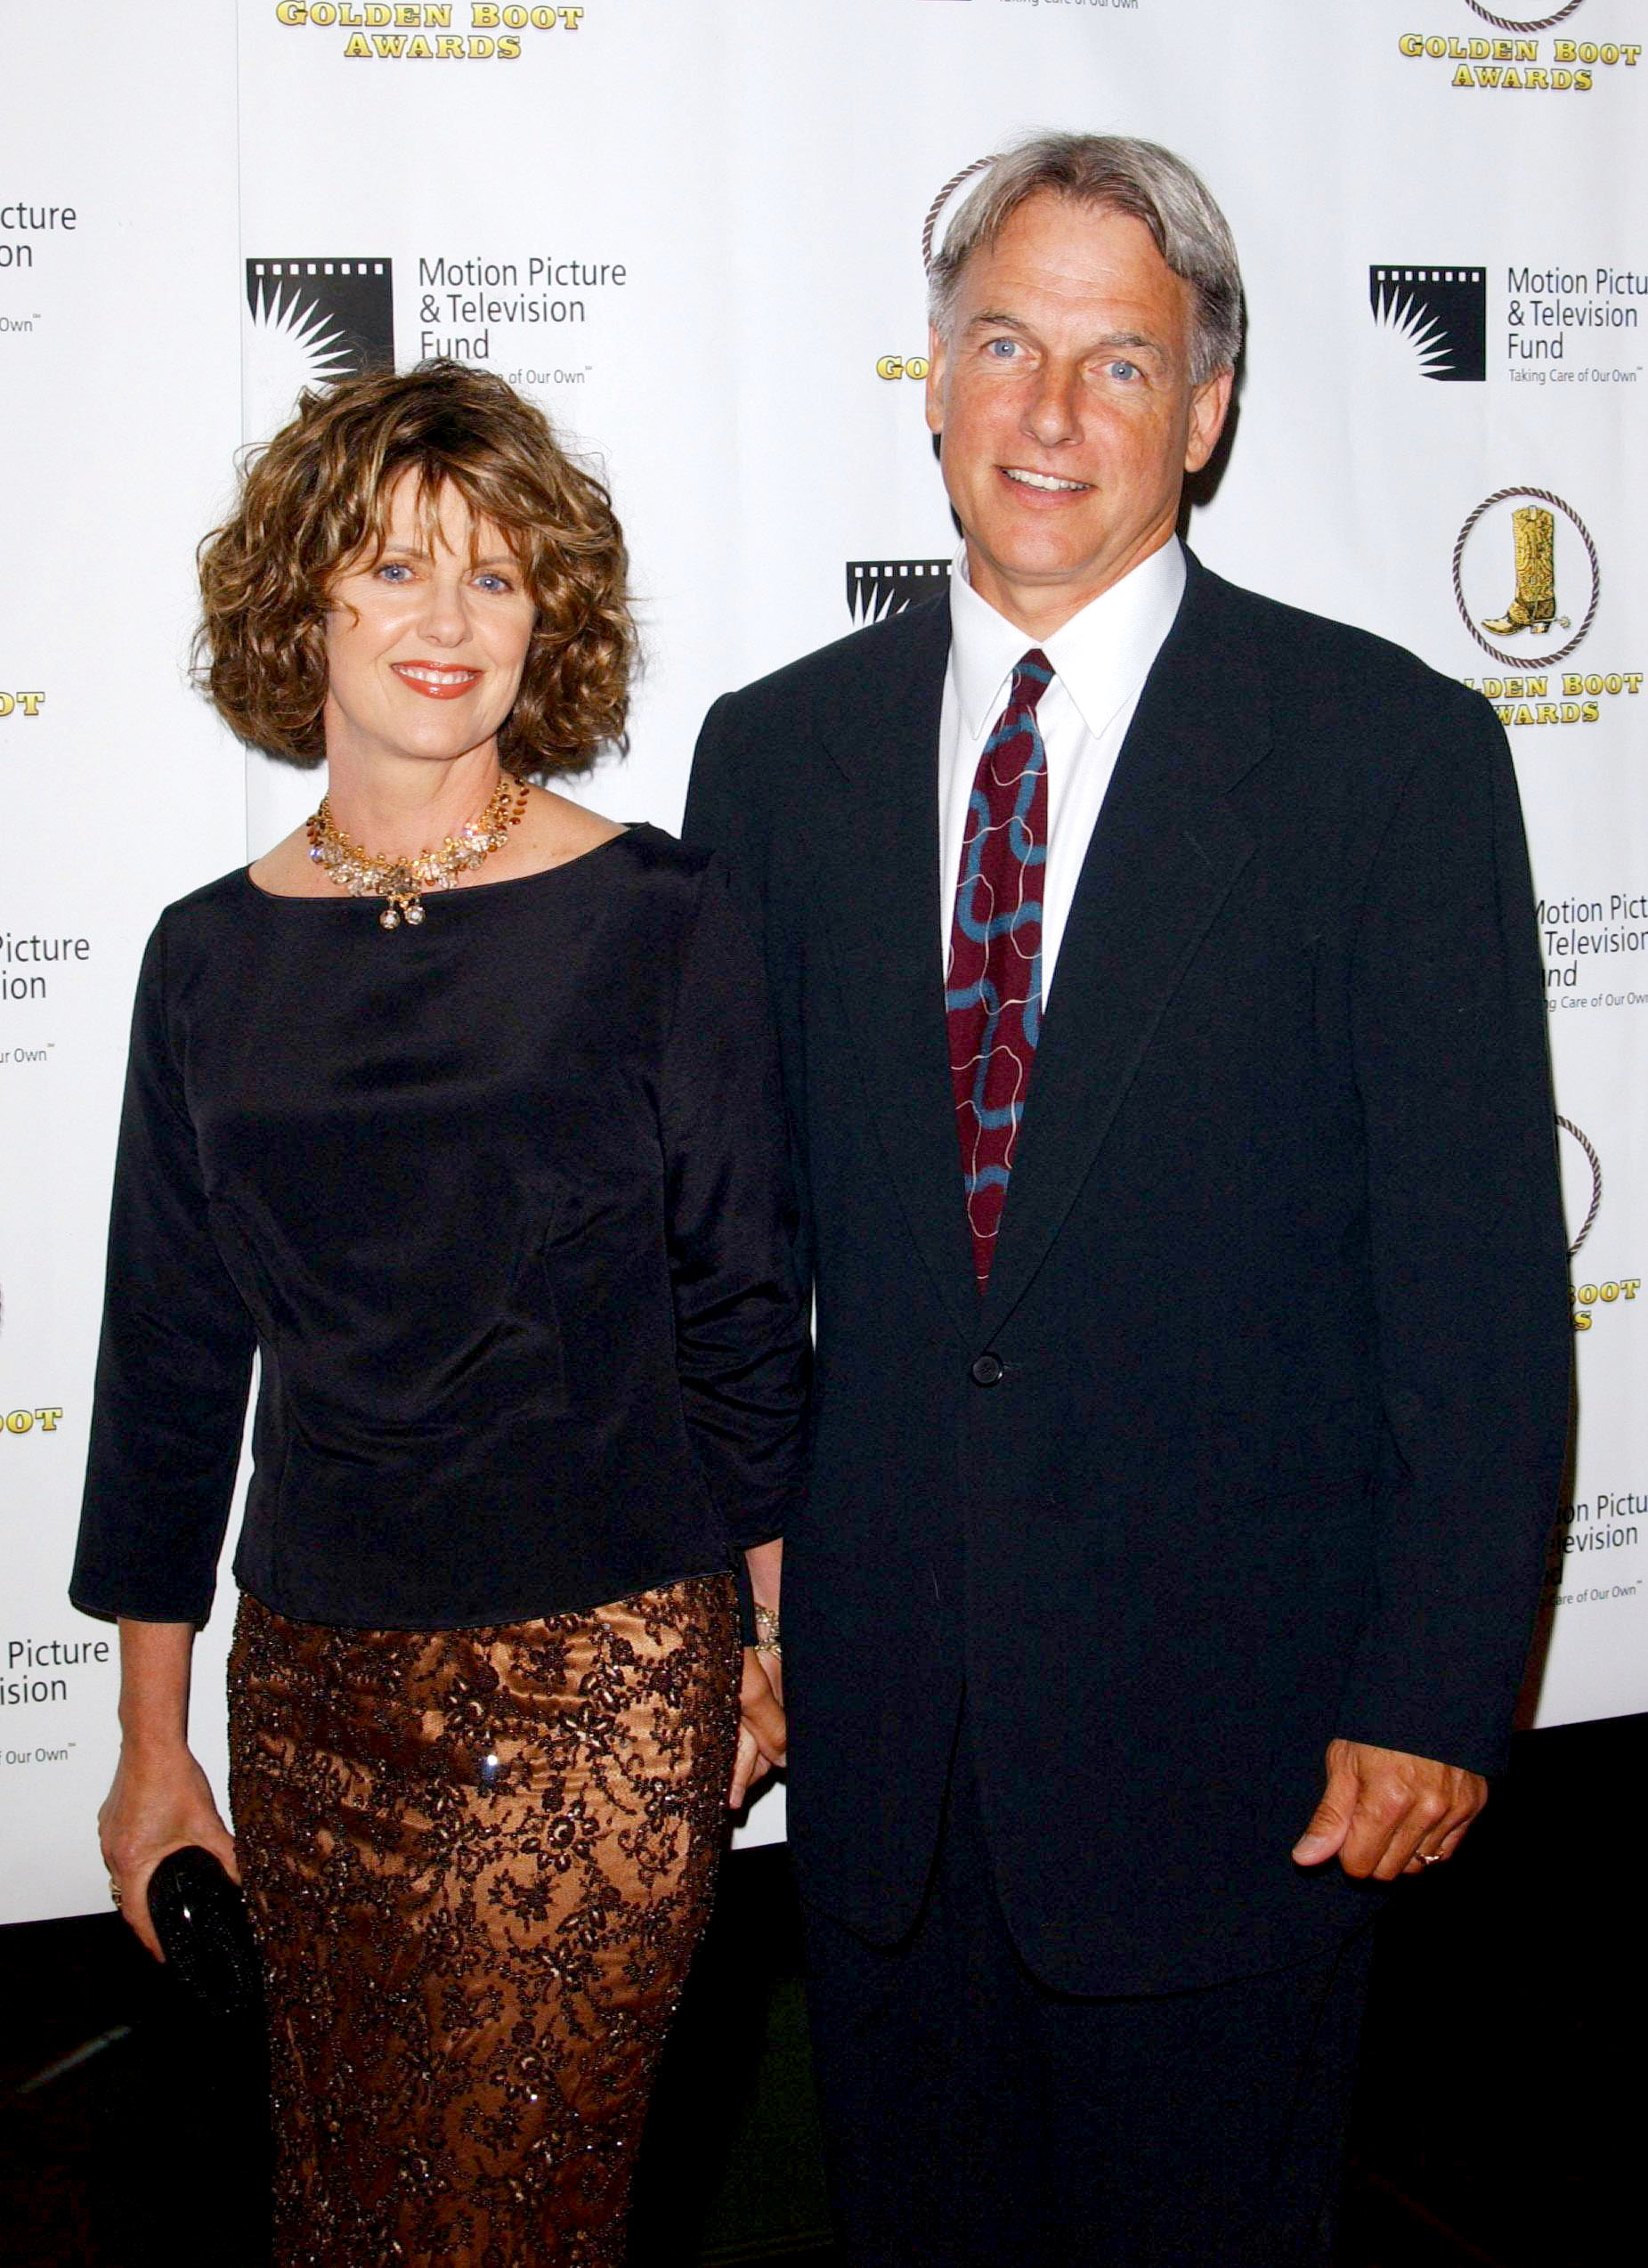 Who Is Pam Dawber's Husband? Relationship Details With Mark Harmon